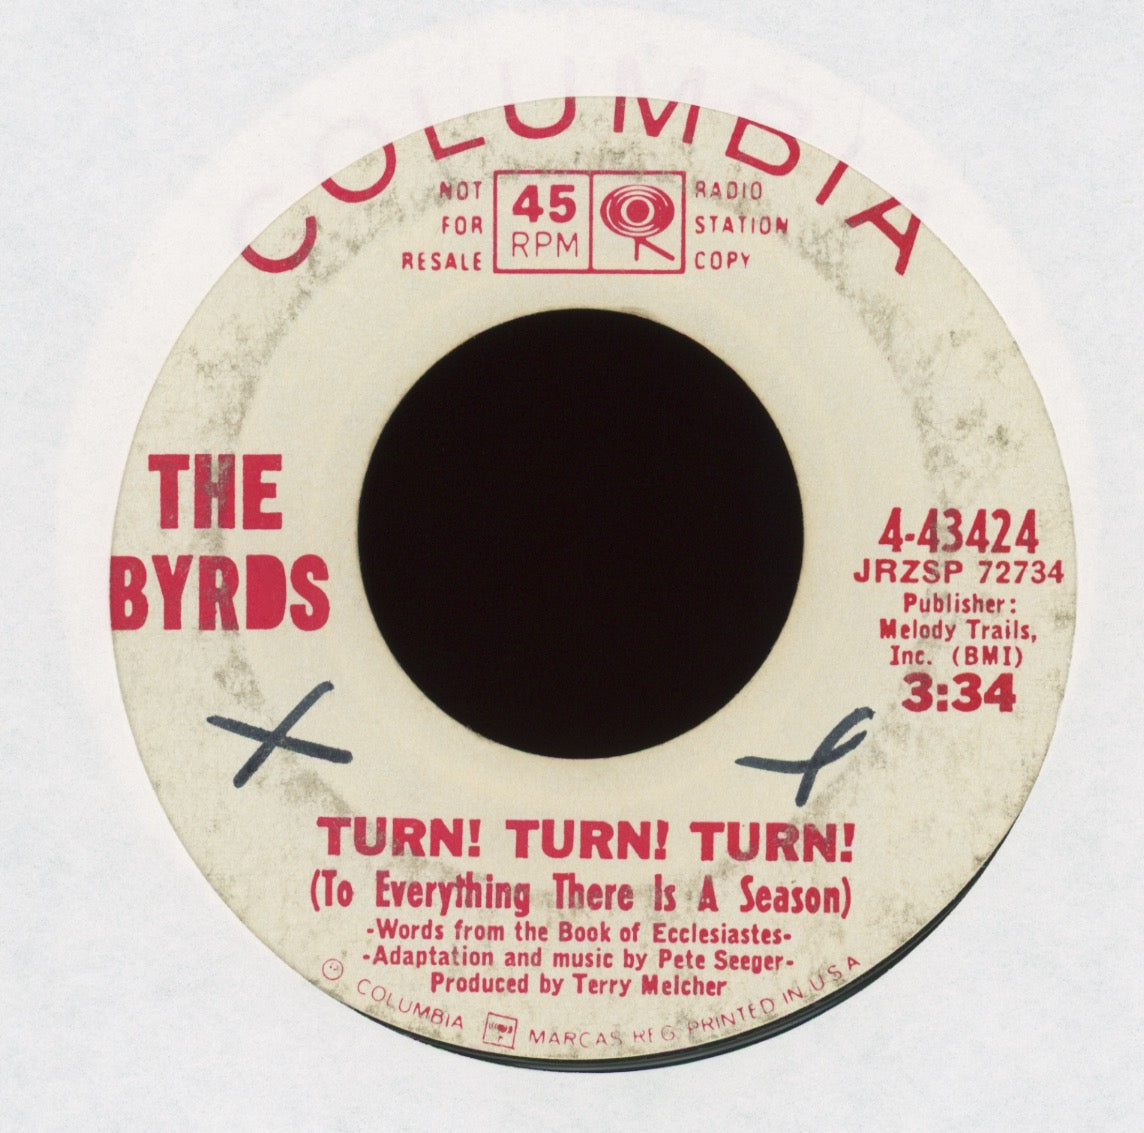 The Byrds - Turn! Turn! Turn! (To Everything There Is A Season) on Columbia Promo Rock 45